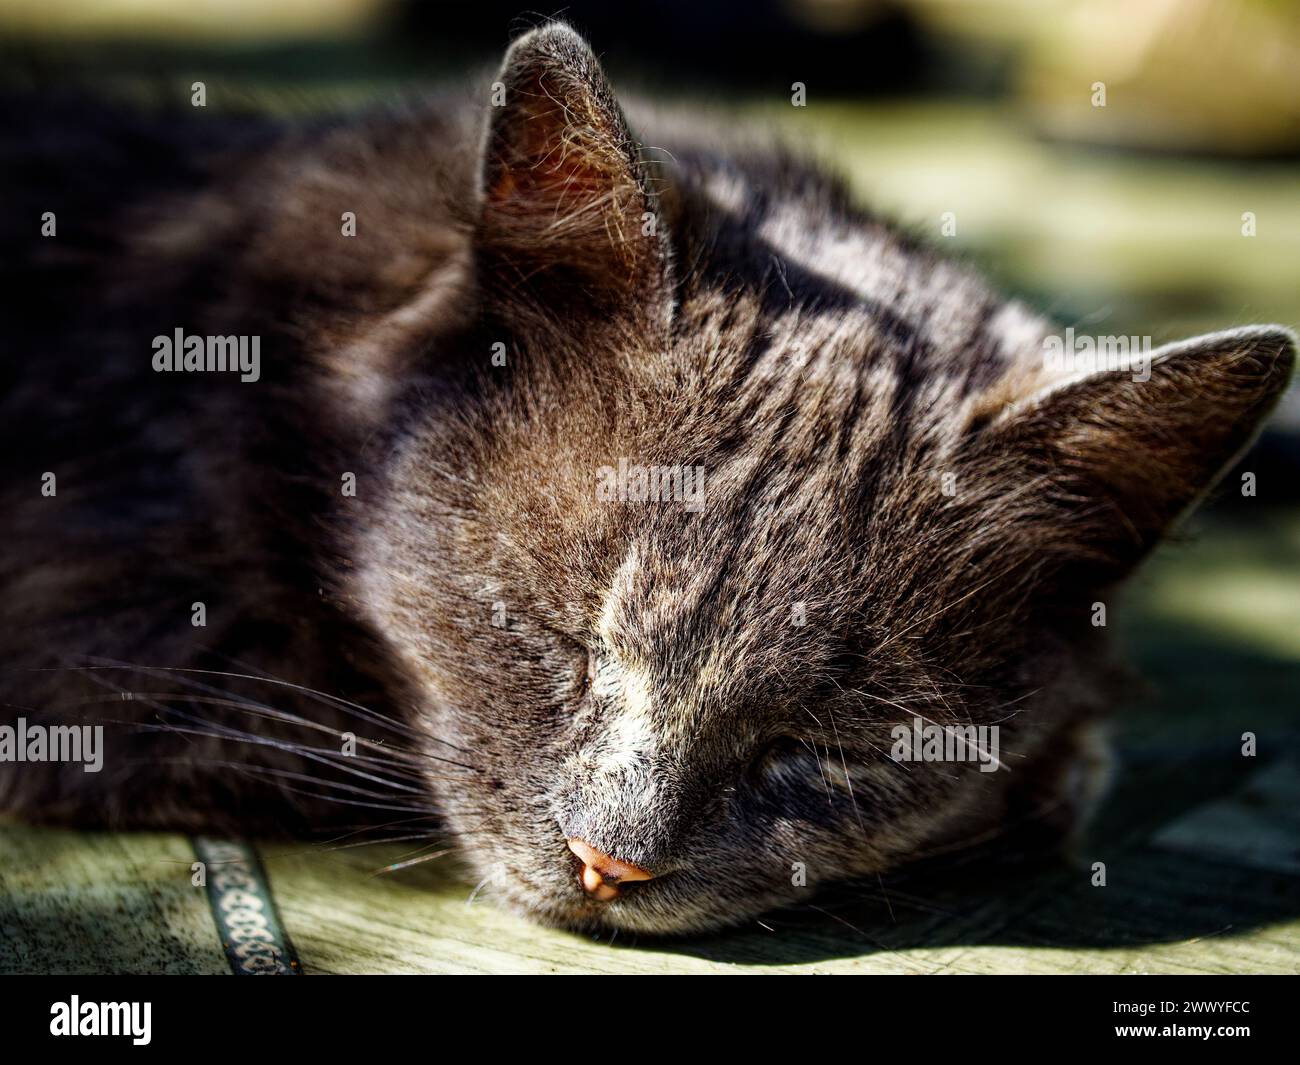 Close-up image of a resting cat on a wooden surface, bathed in natural light, showcasing detailed grey and brown fur. Stock Photo